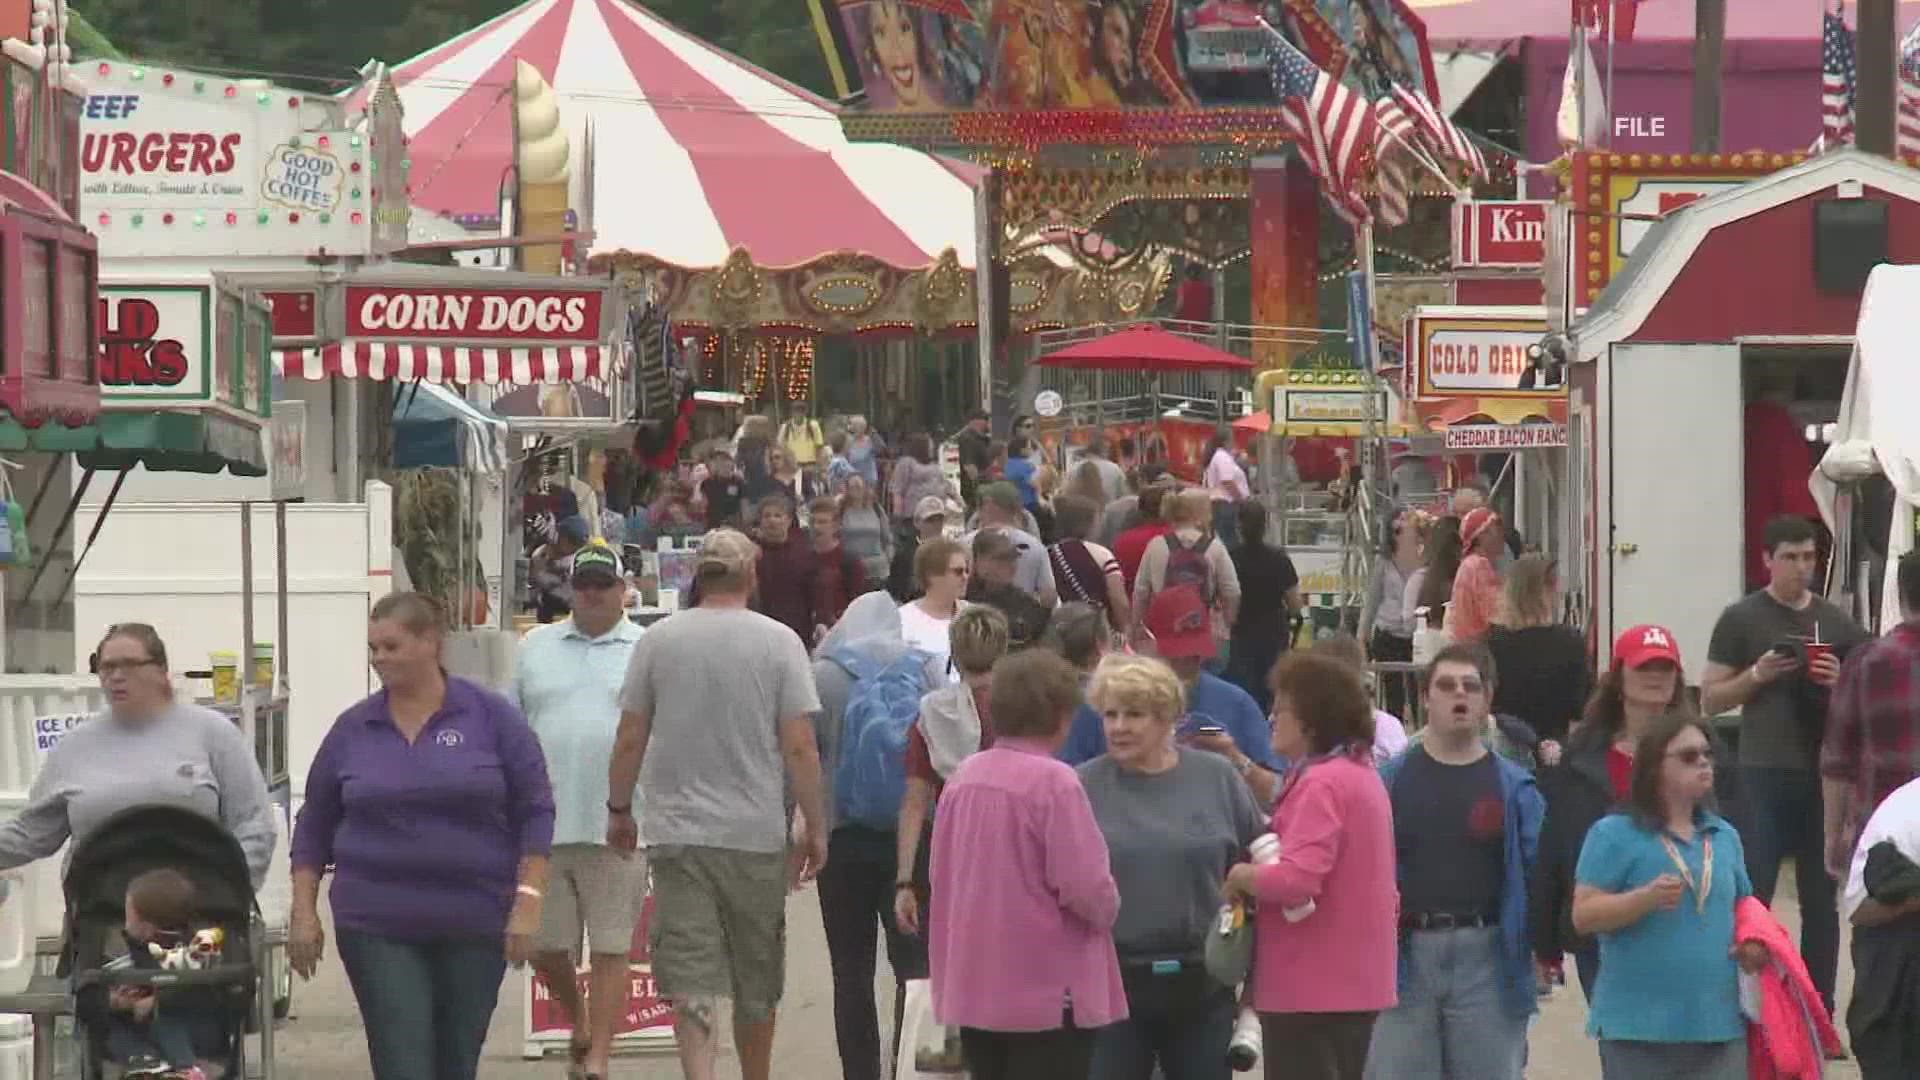 But the fair season isn’t over after kids return to school. Several biggies are still planned.